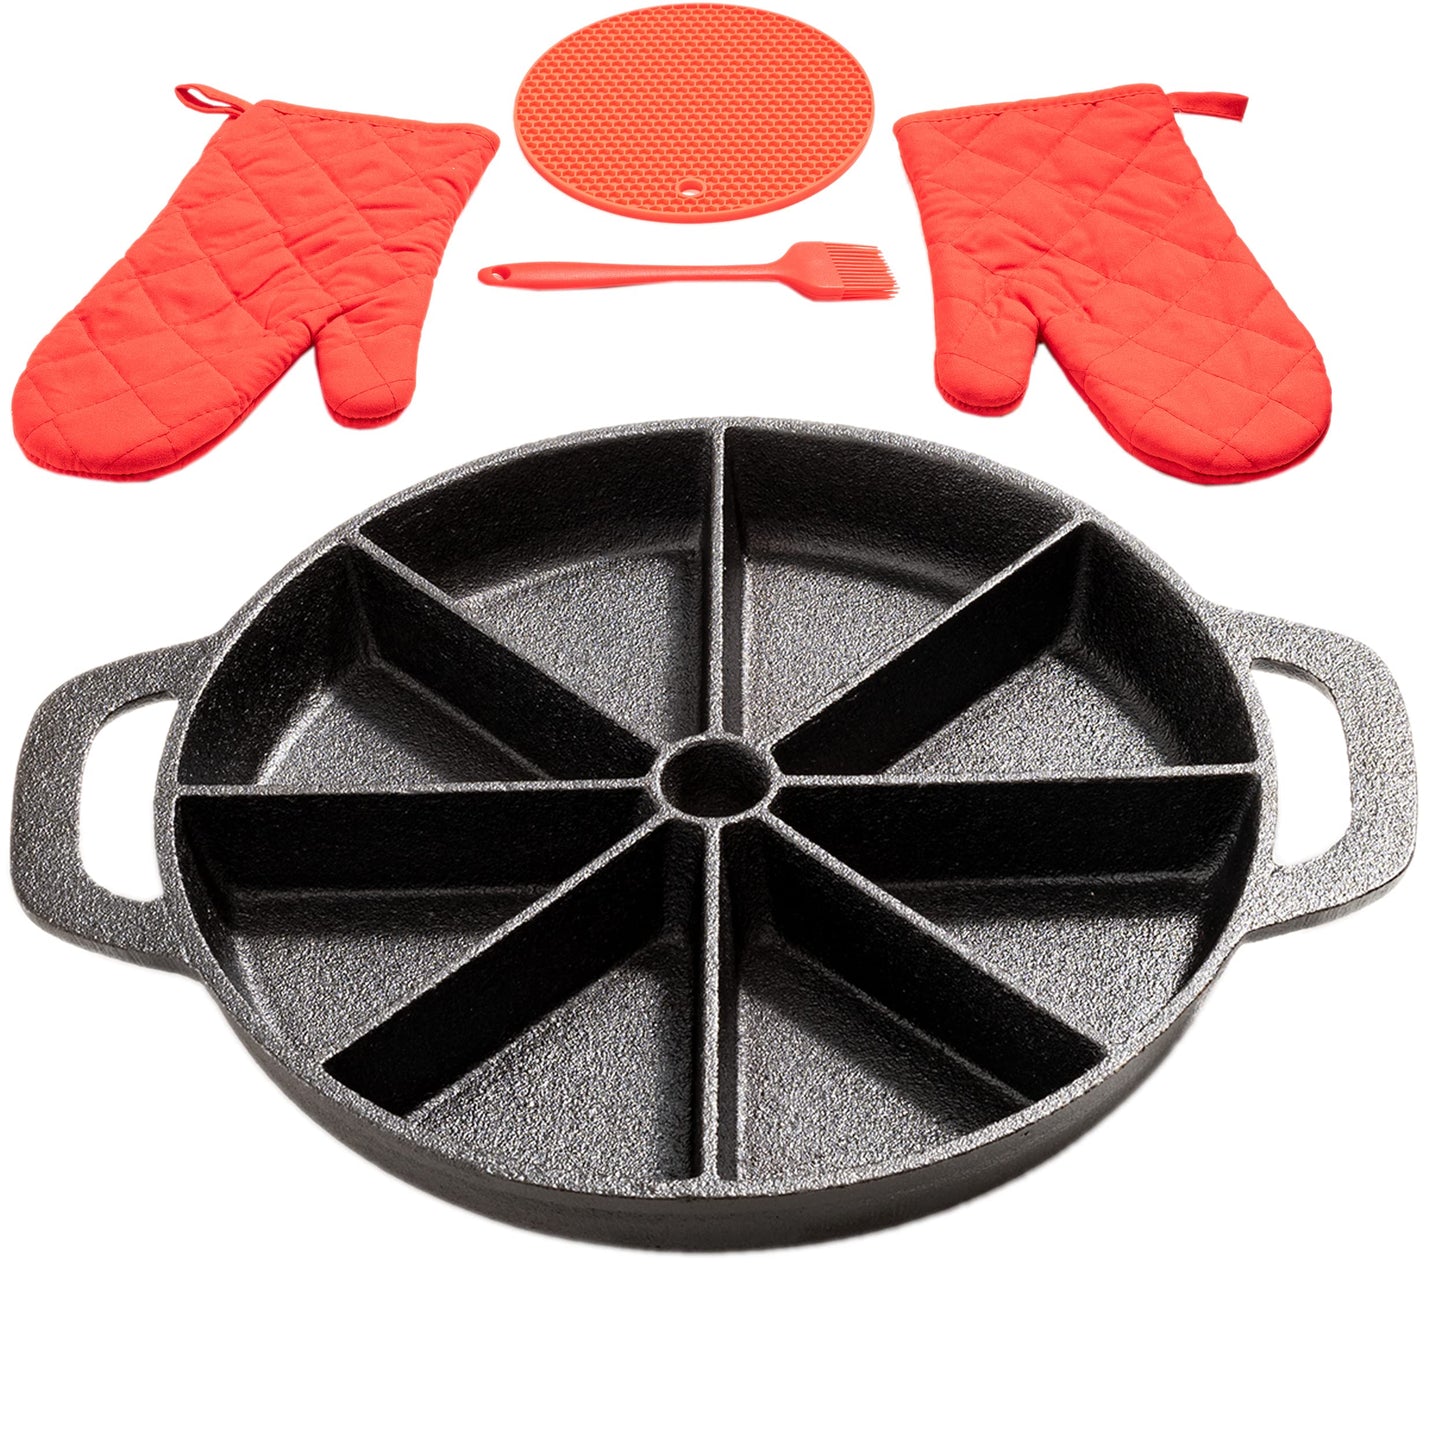 Cast Iron Scone Pan / Cornbread Pan for 8 Wedge Shaped Bakes, Pre-Seasoned - Comes with Oven Mitts, Silicone Trivet and Oil Brush - by KUHA